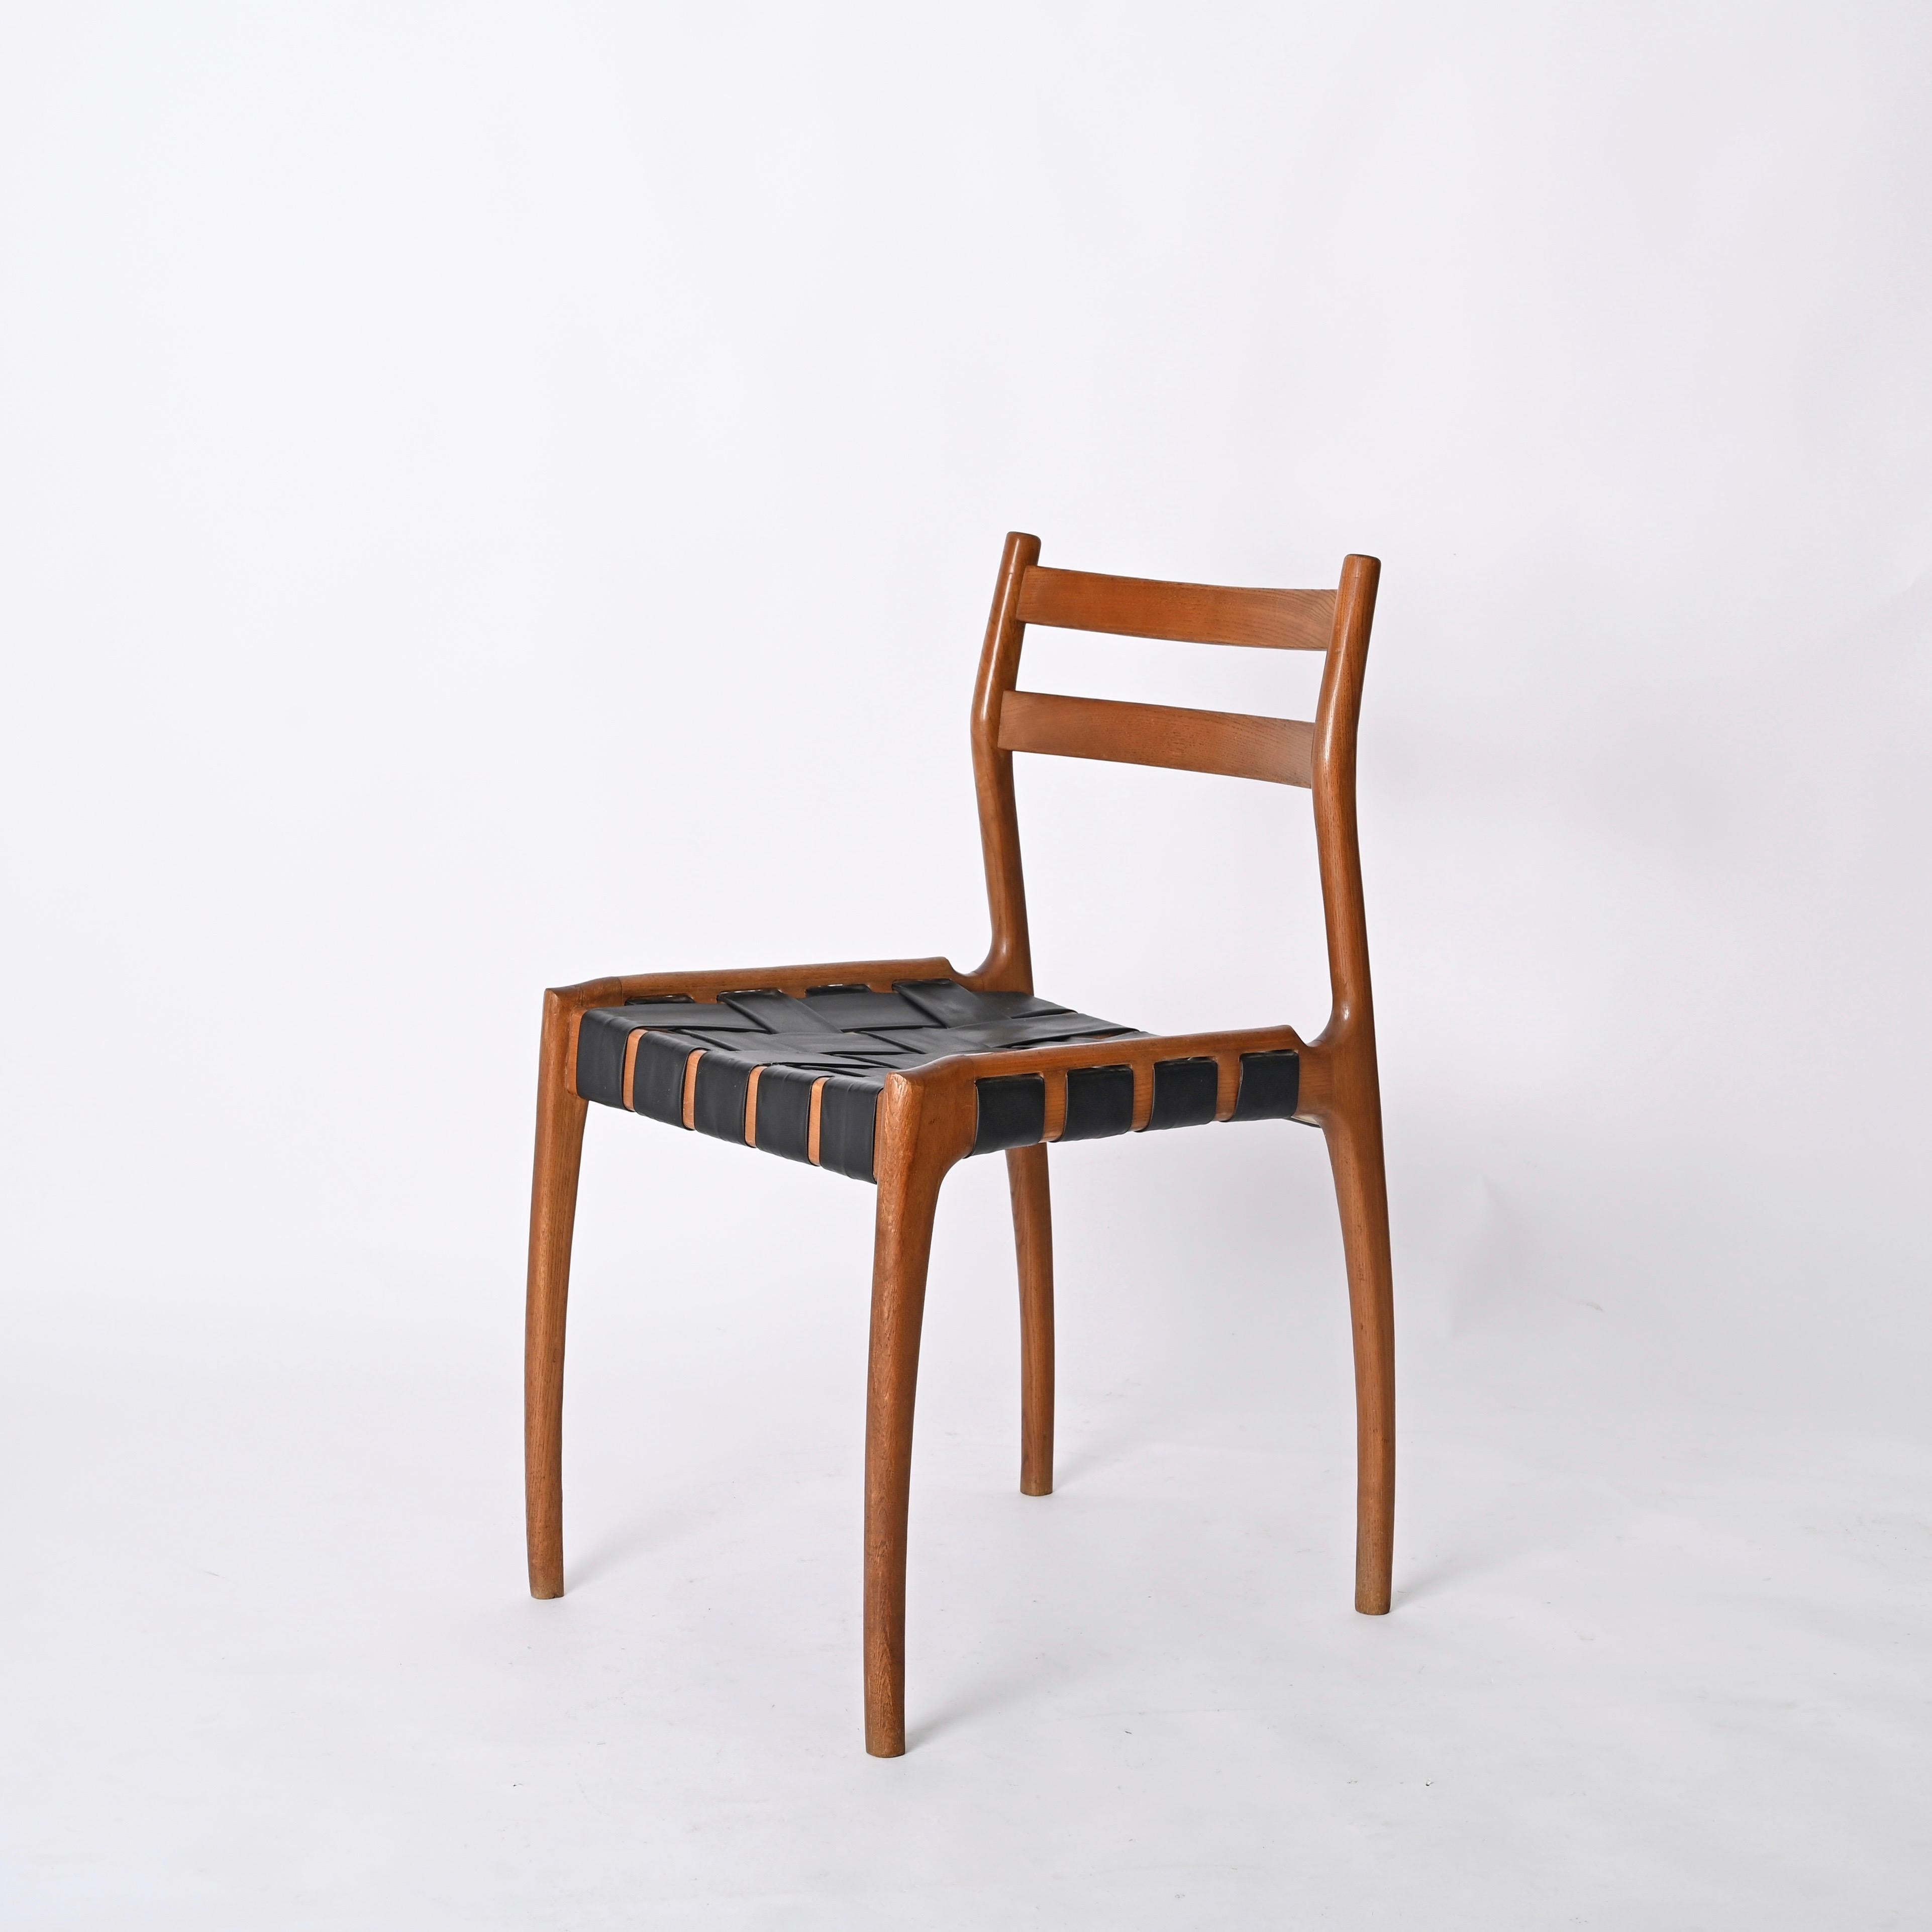 Gorgeous mid-century chair in oak wood with black leather seat. This charming and unique chair was designed by Piero Palange and Werther Toffoloni for Montina in Italy during the 1960s.  

This rare chair is extremely light and has a charming design